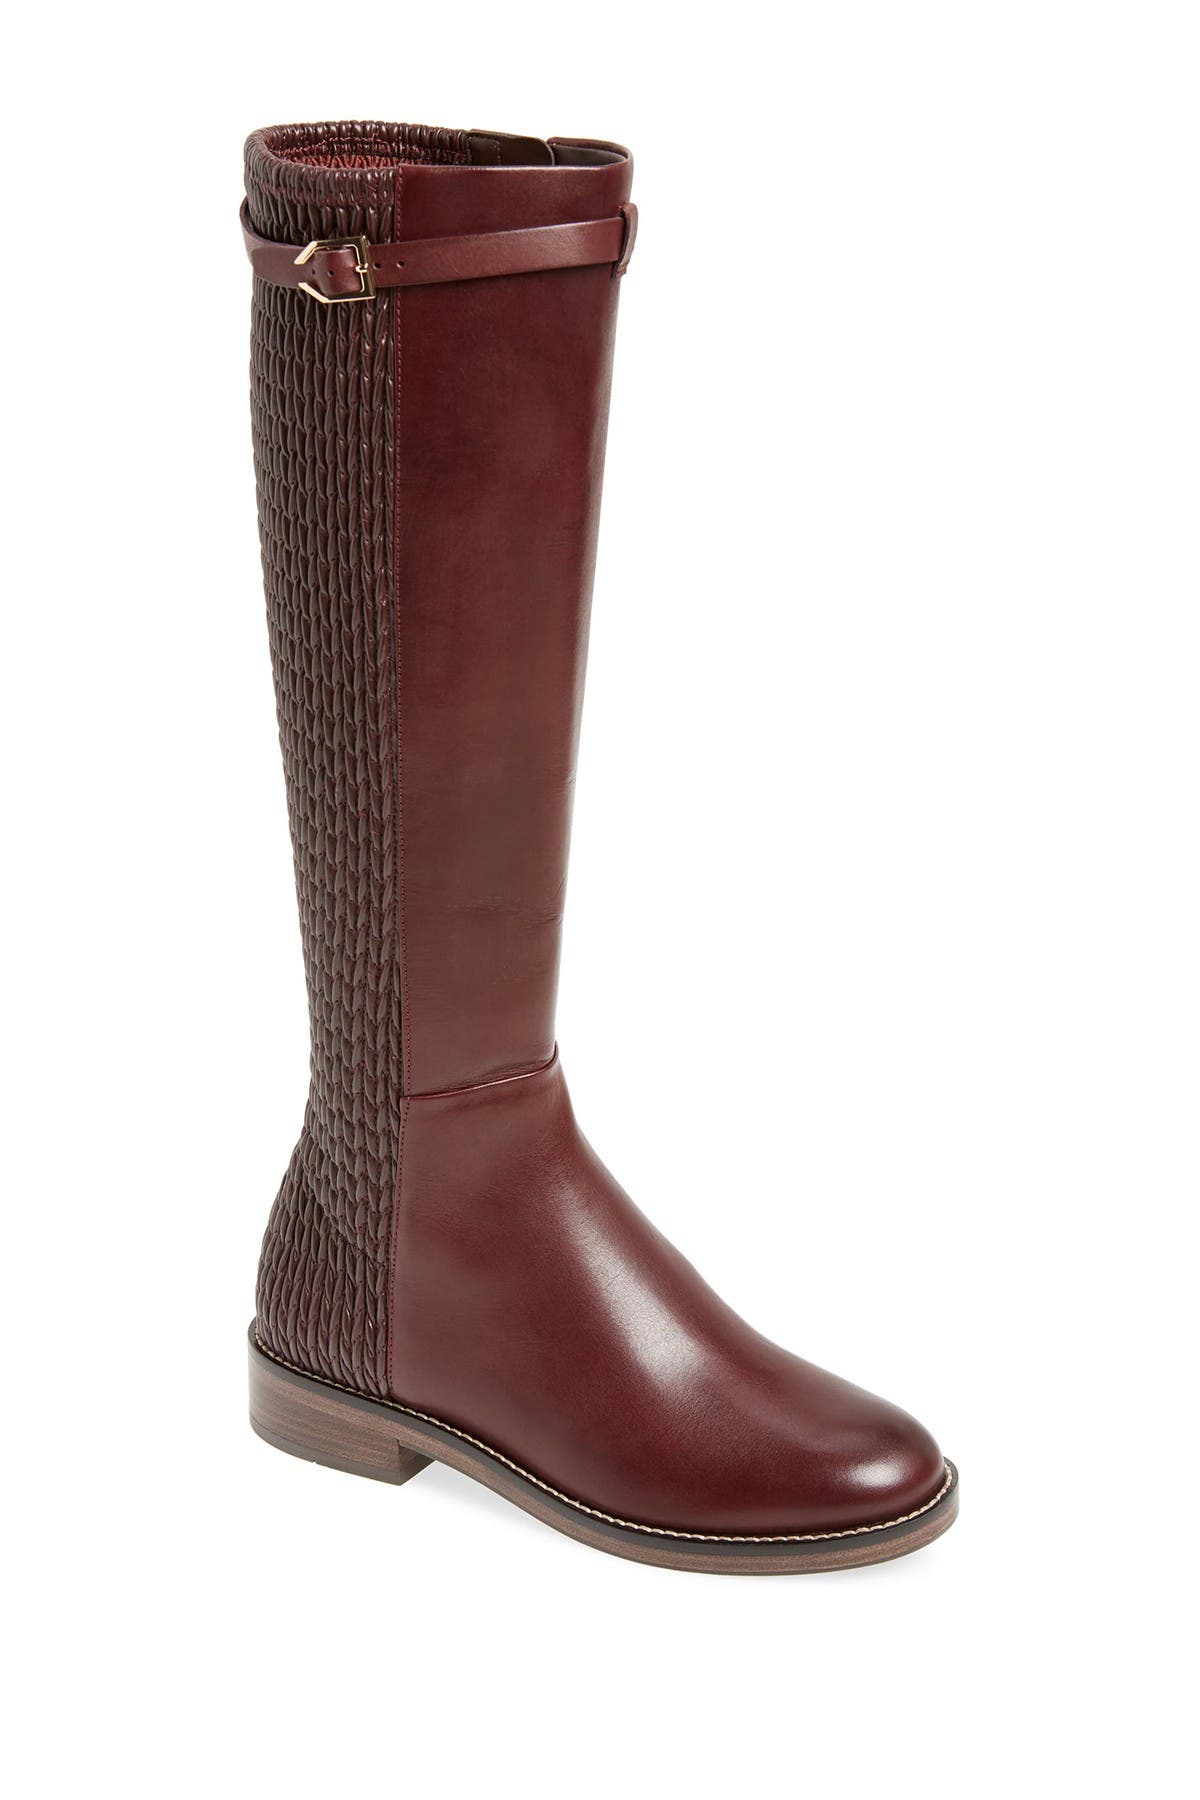 cole haan lexi grand boots